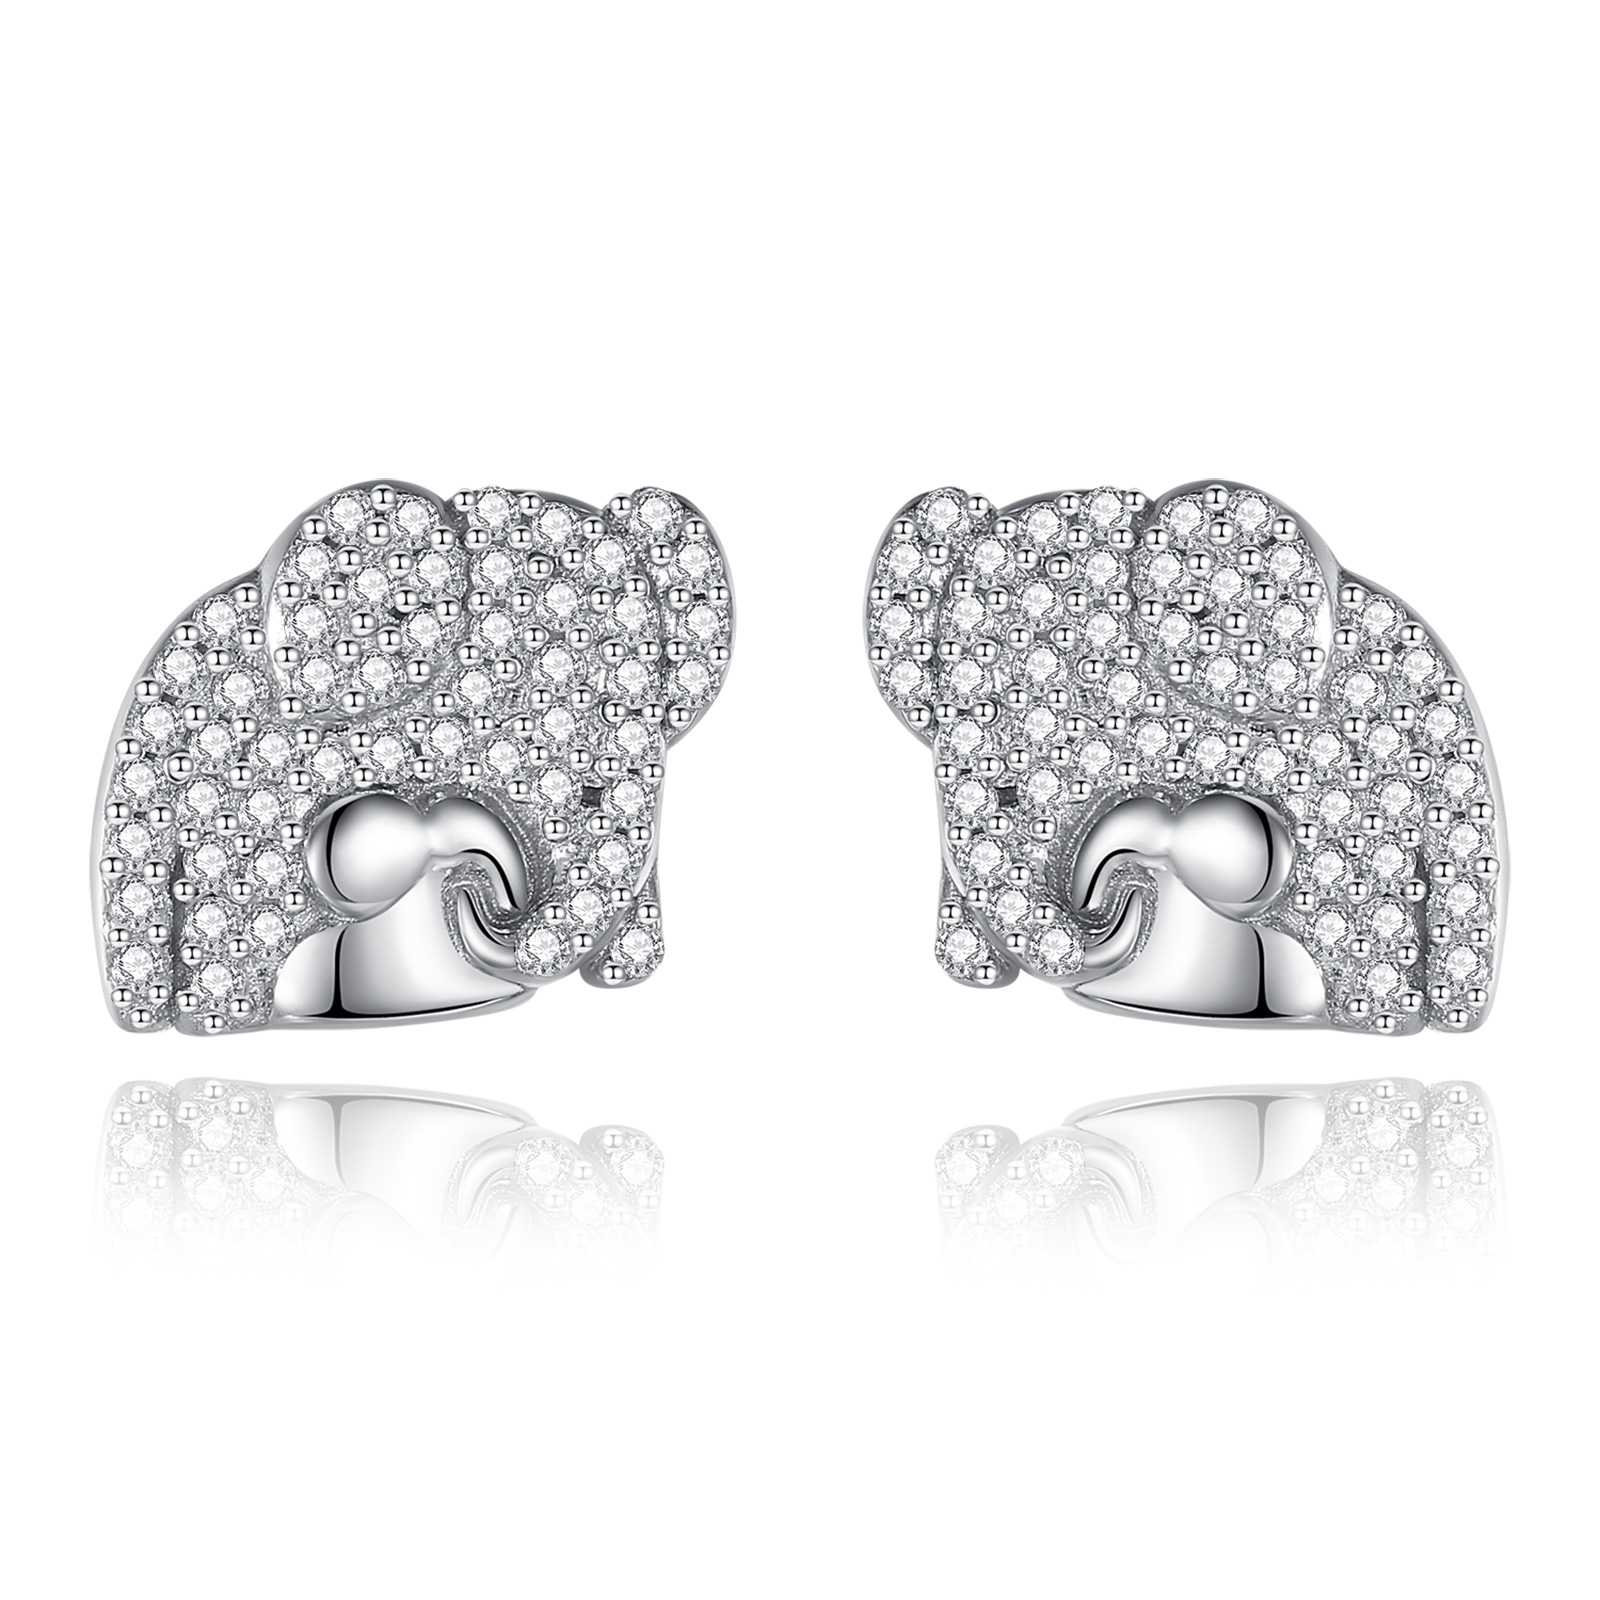 Merryshine Jewelry S925 Sterling Silver Elephant Shaped Stud Earrings with Cubic Zirconia